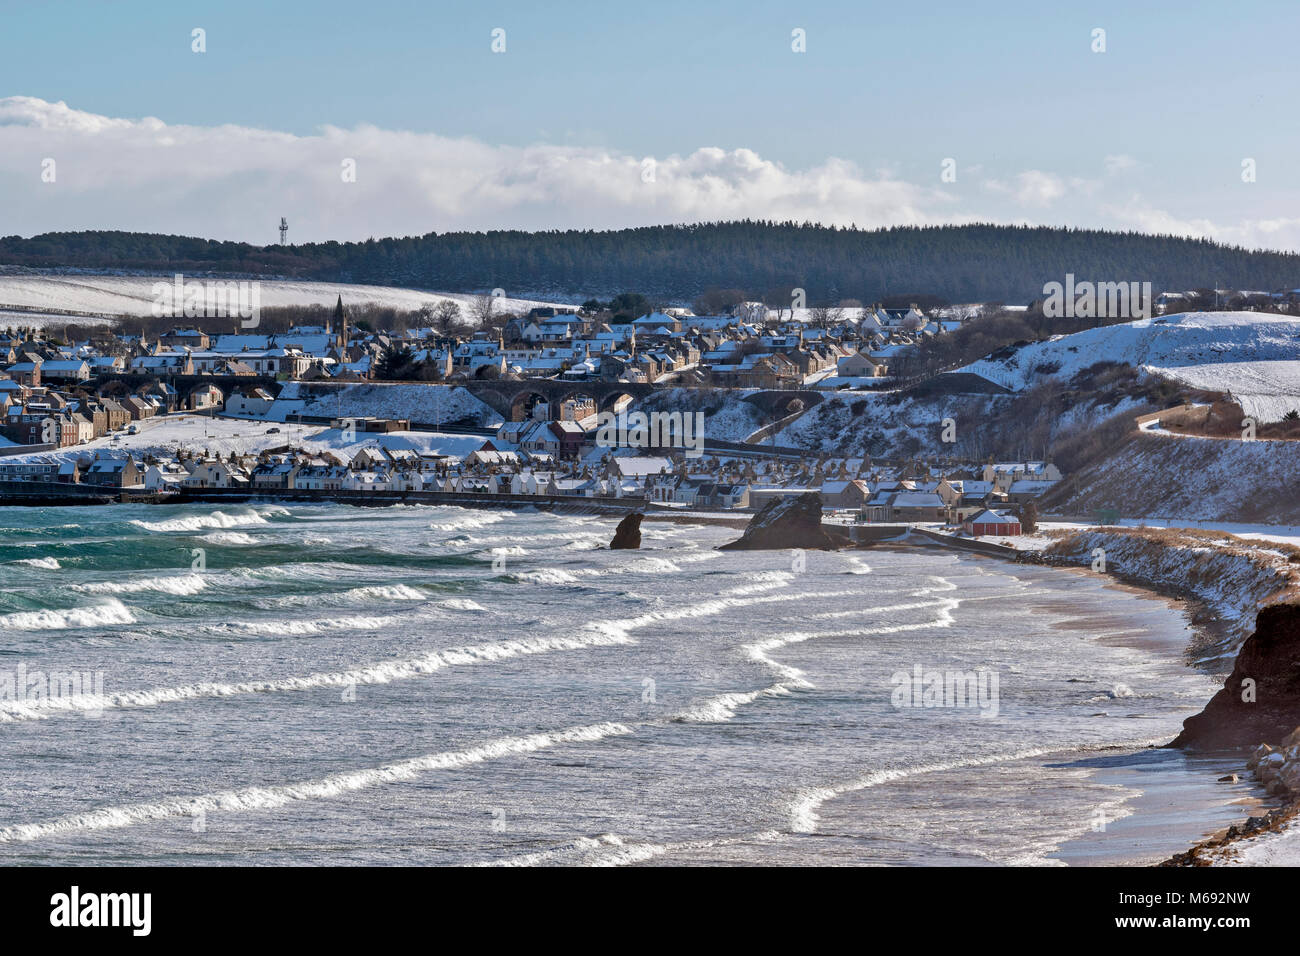 MORAY COAST SCOTLAND CULLEN BAY WITH A STORMY SEA WINTER SNOW ON THE HOUSES IN THE TOWN Stock Photo